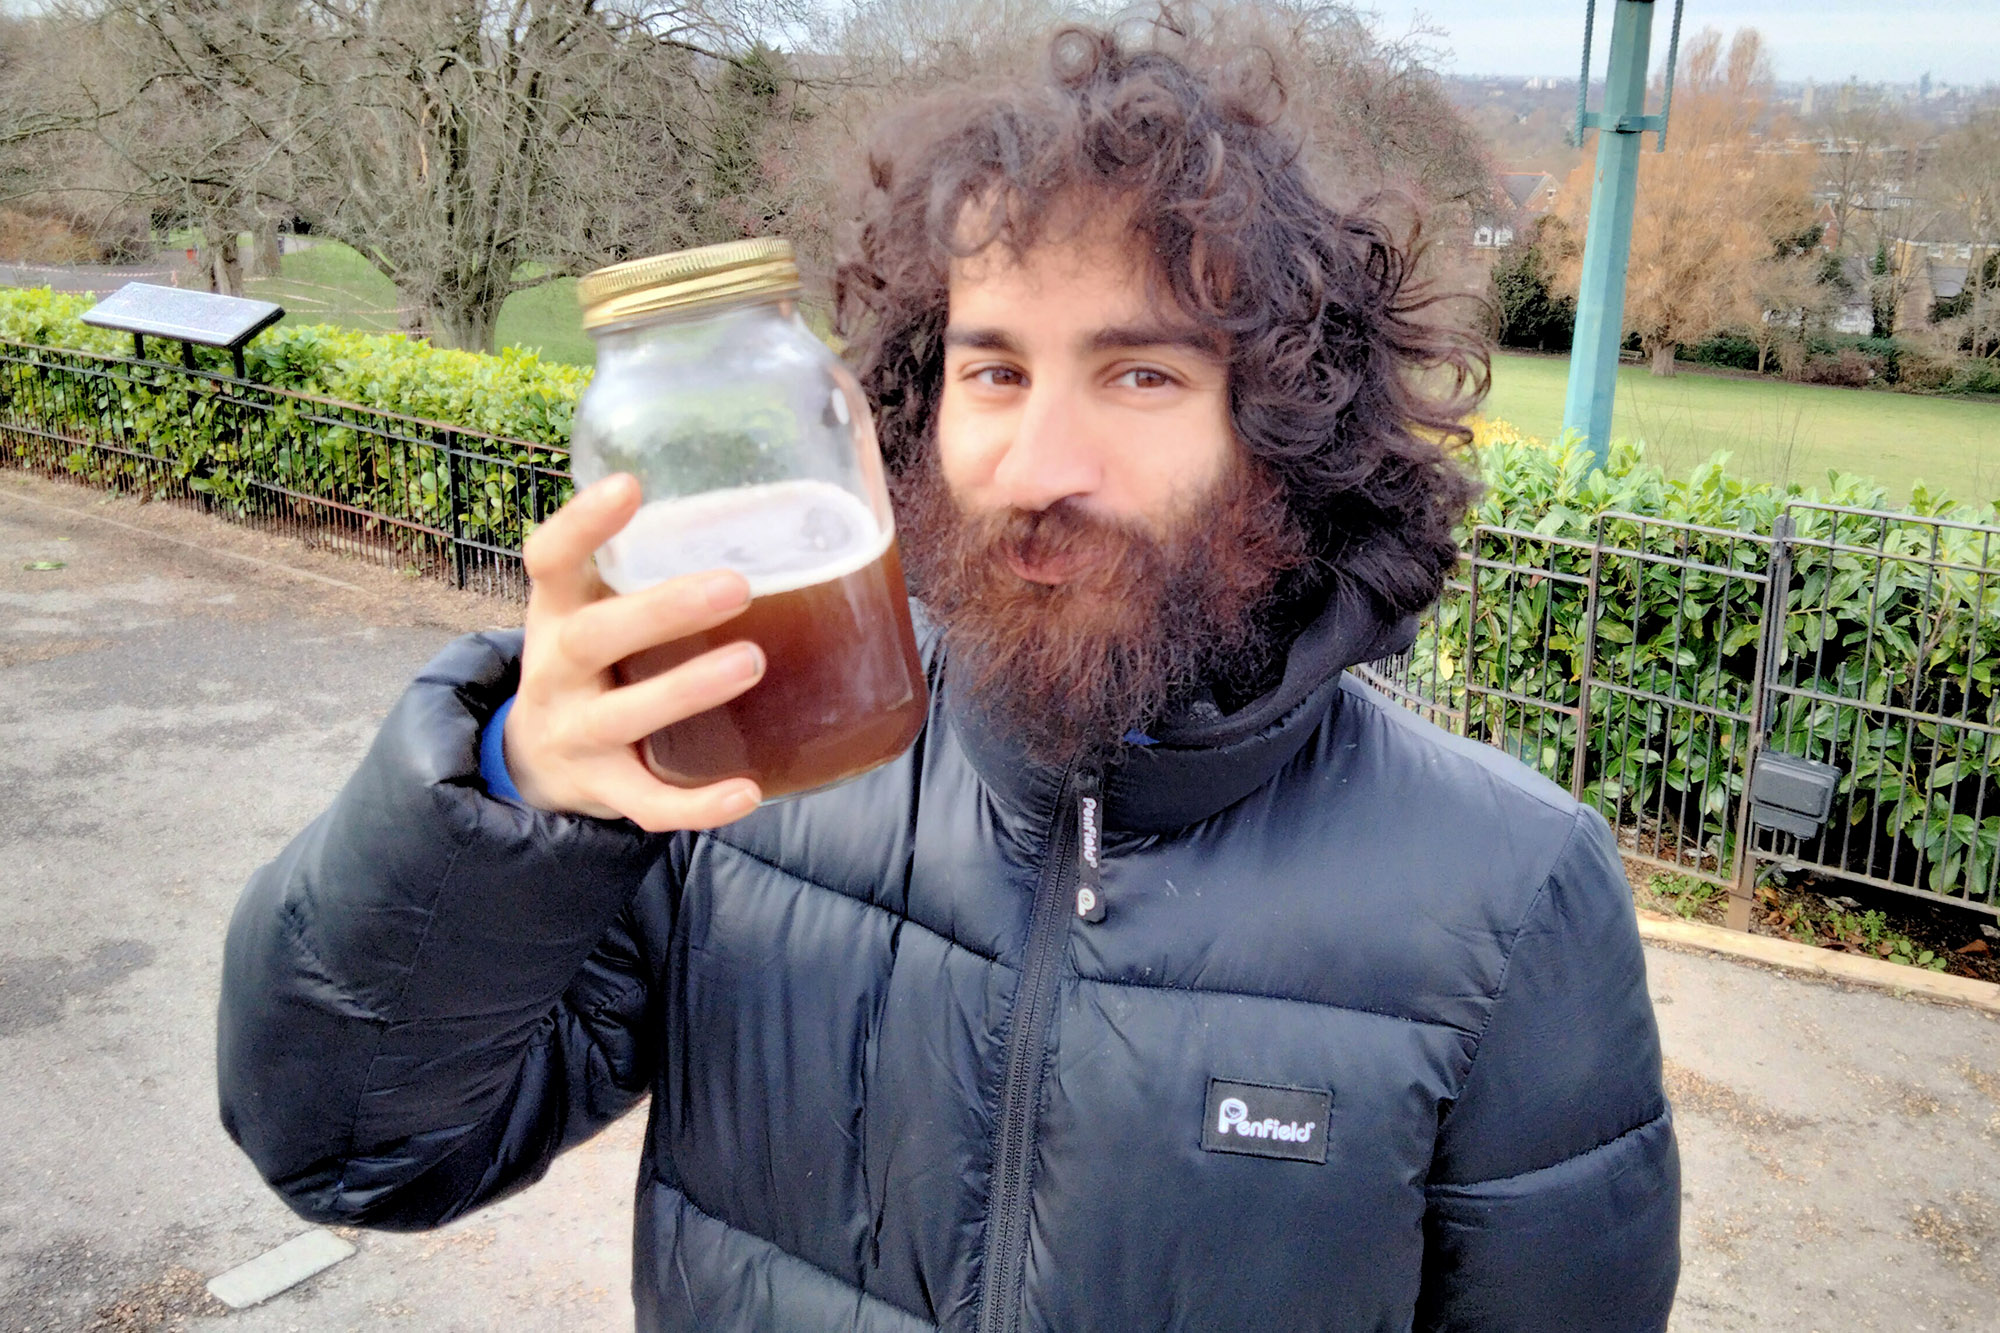 A vegan man claims that drinking his aged urine is the secret to eternal youth